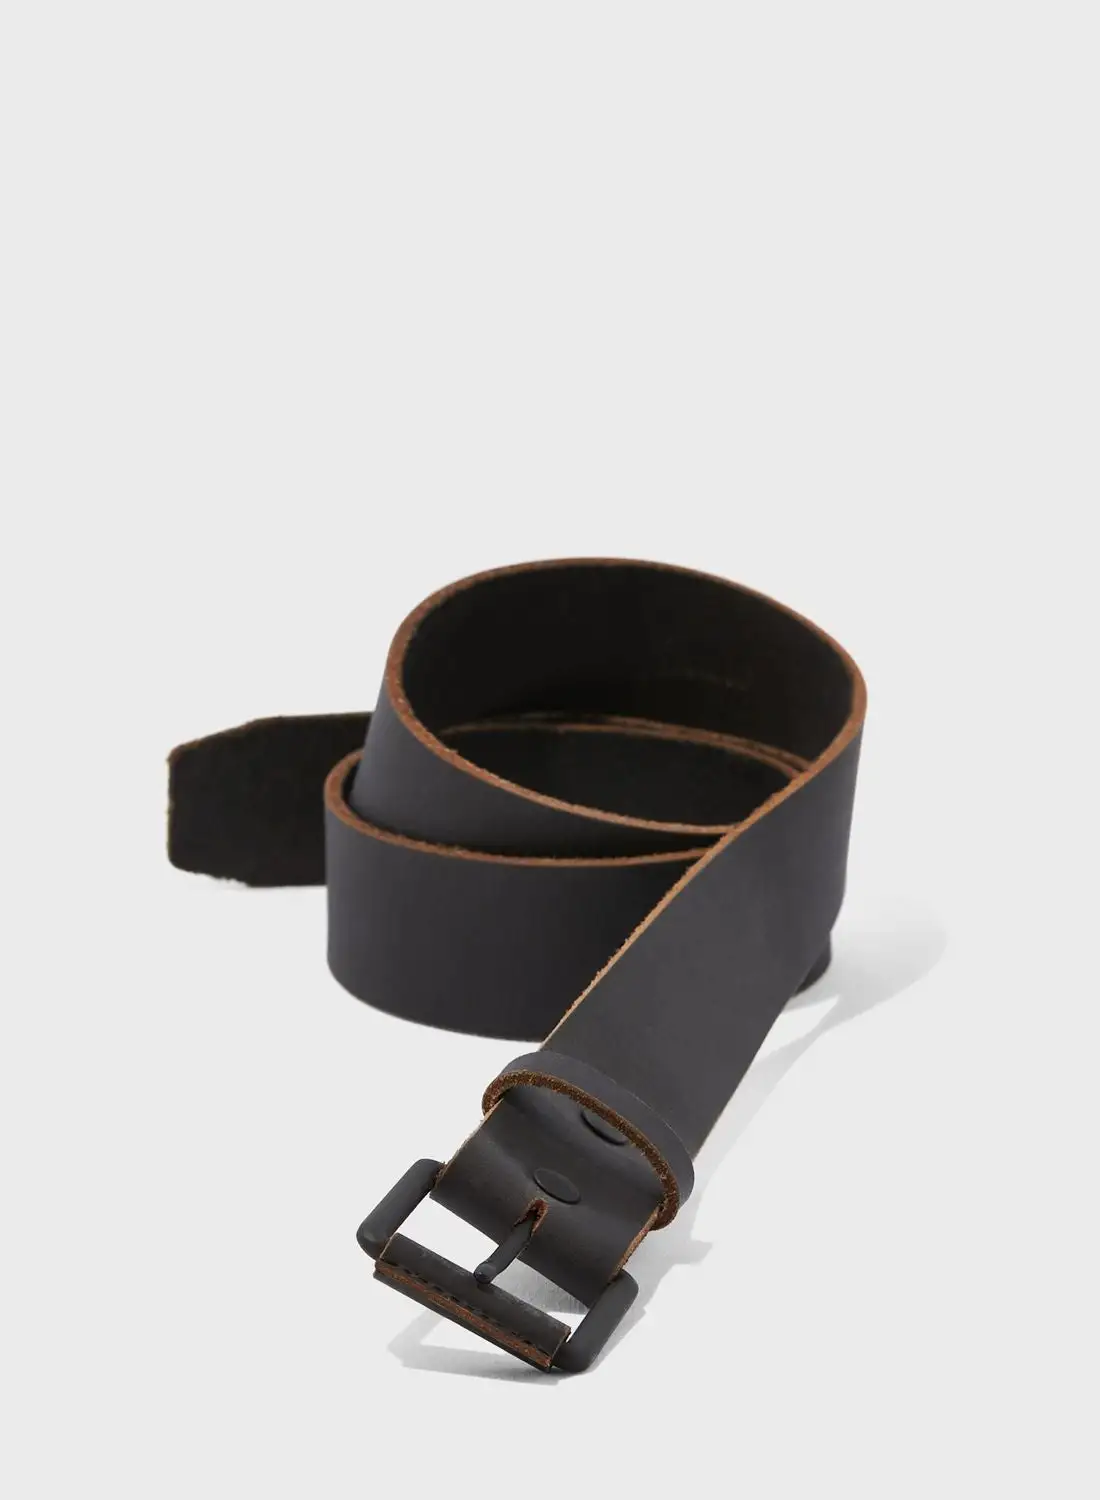 American Eagle Leather Workwear Allocated Hole Belt